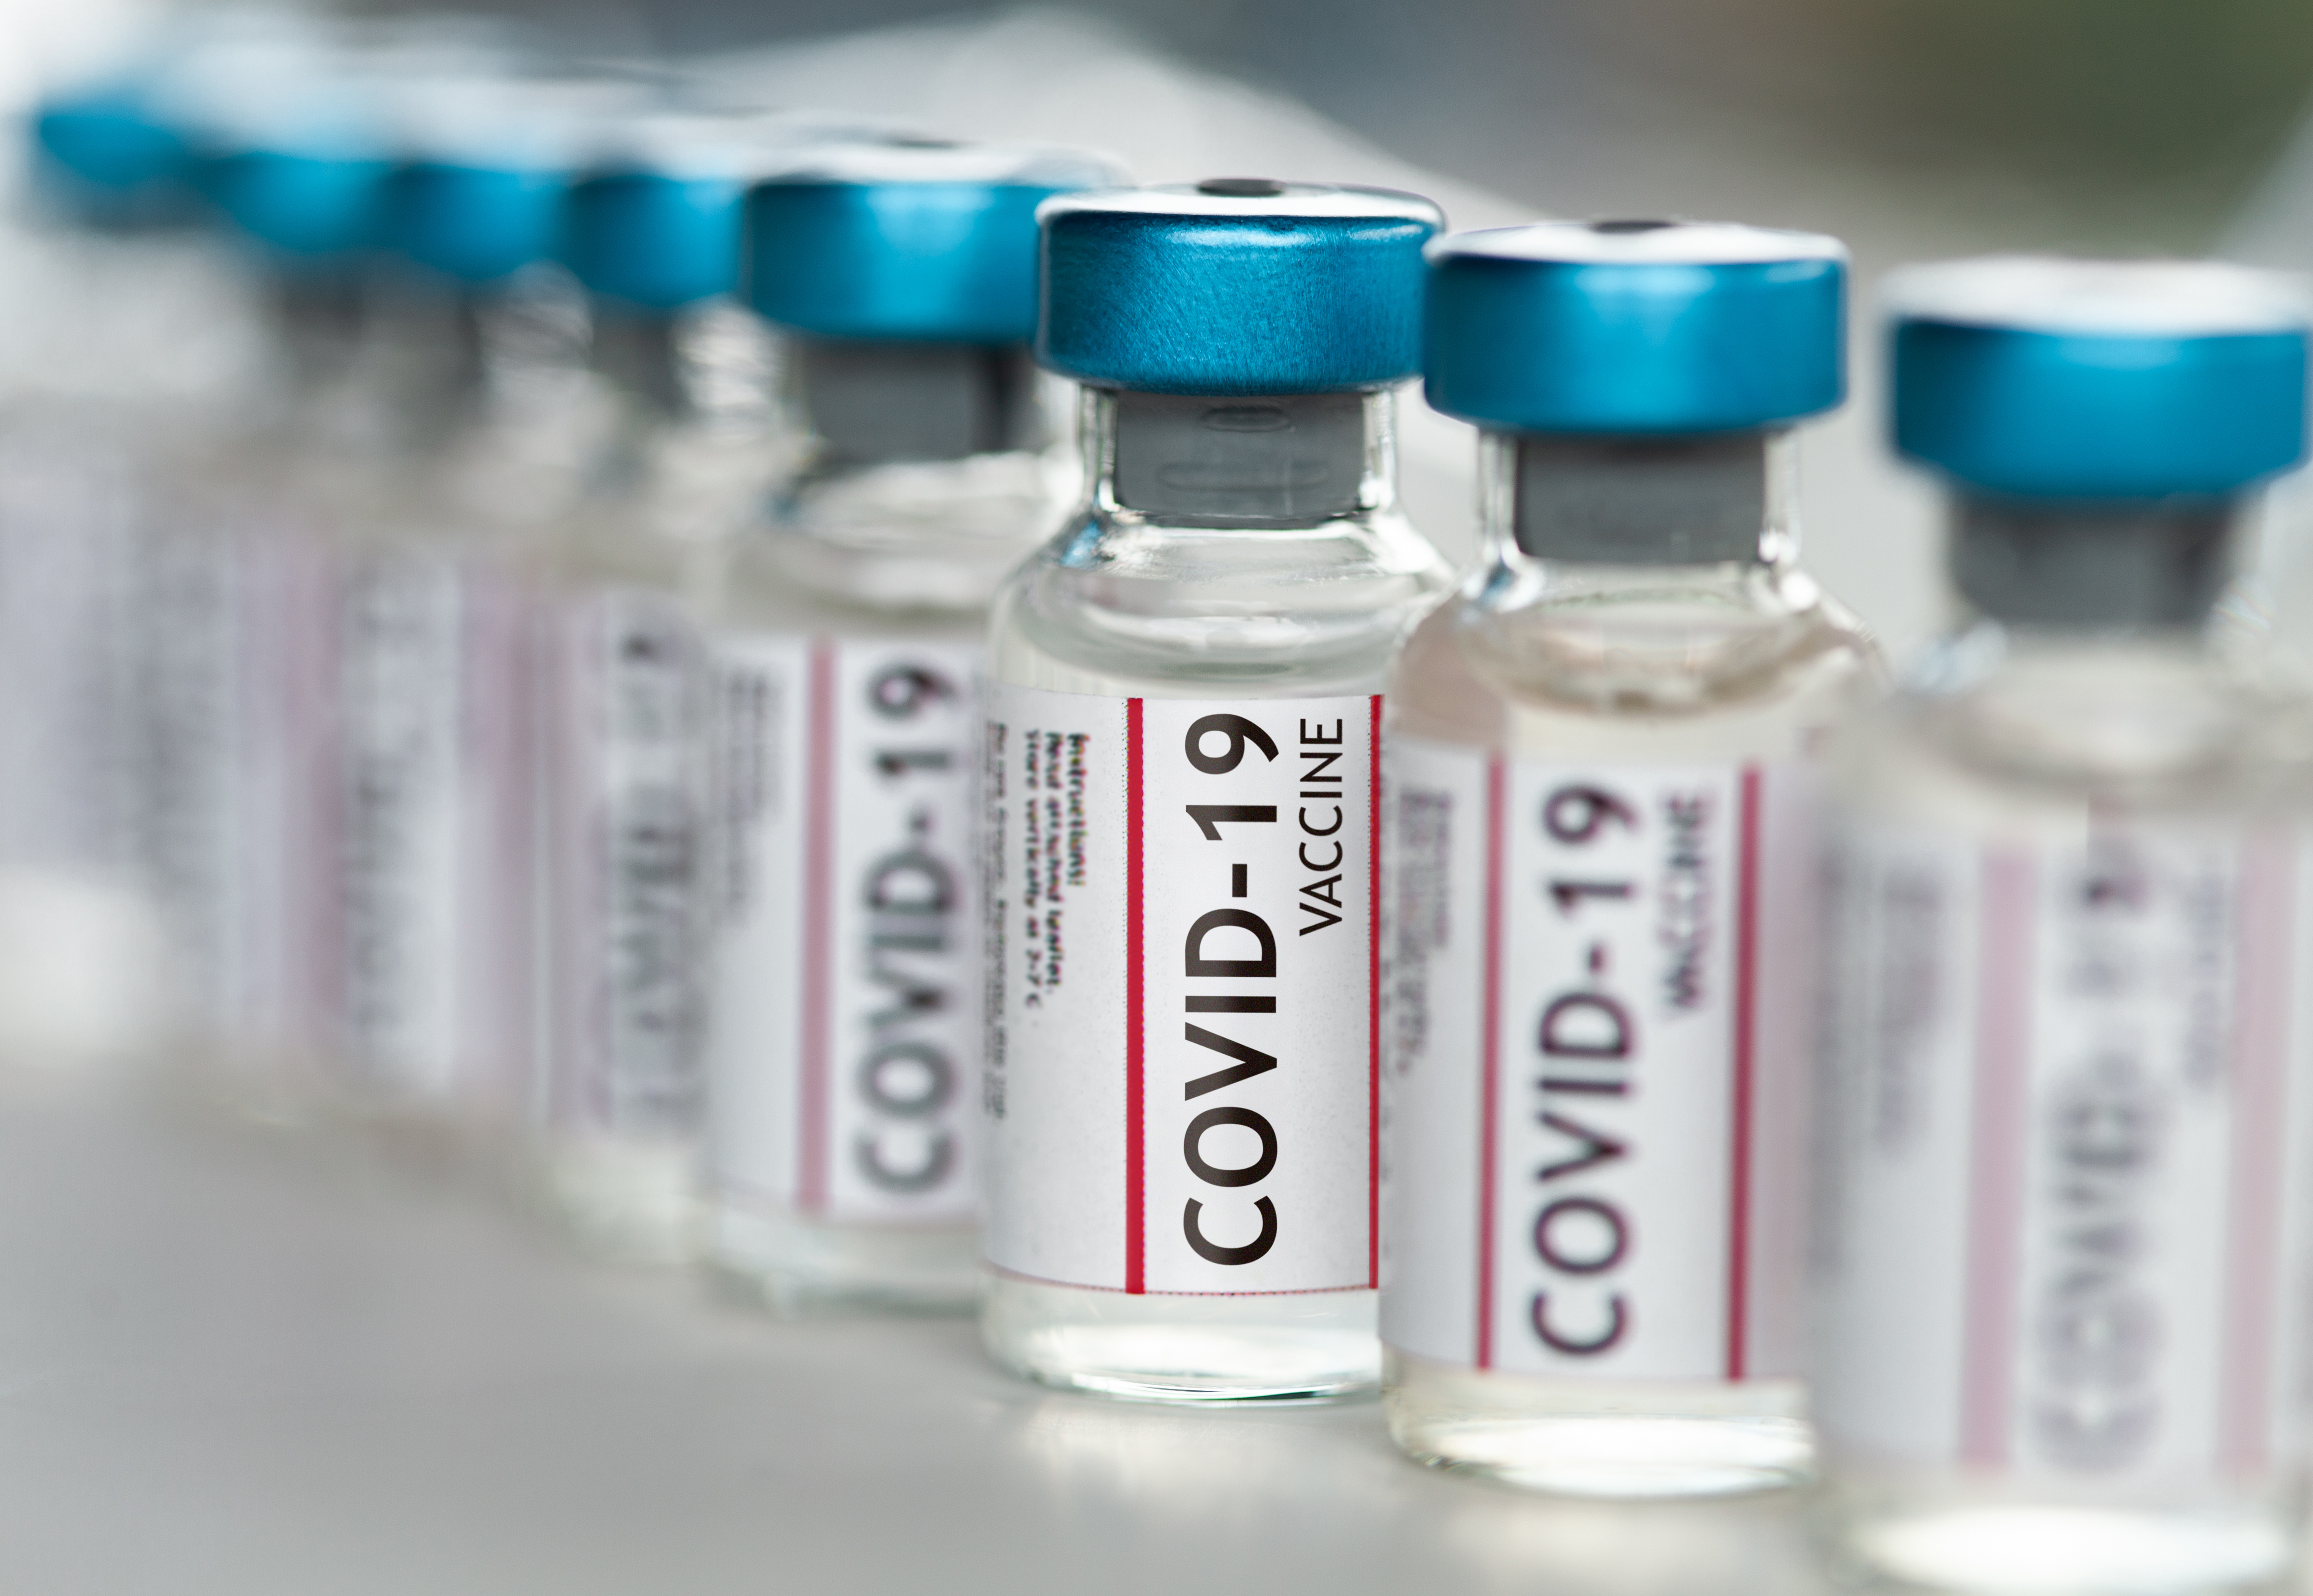 Many expectant mothers unlikely to get vaccinated for COVID-19, survey  finds